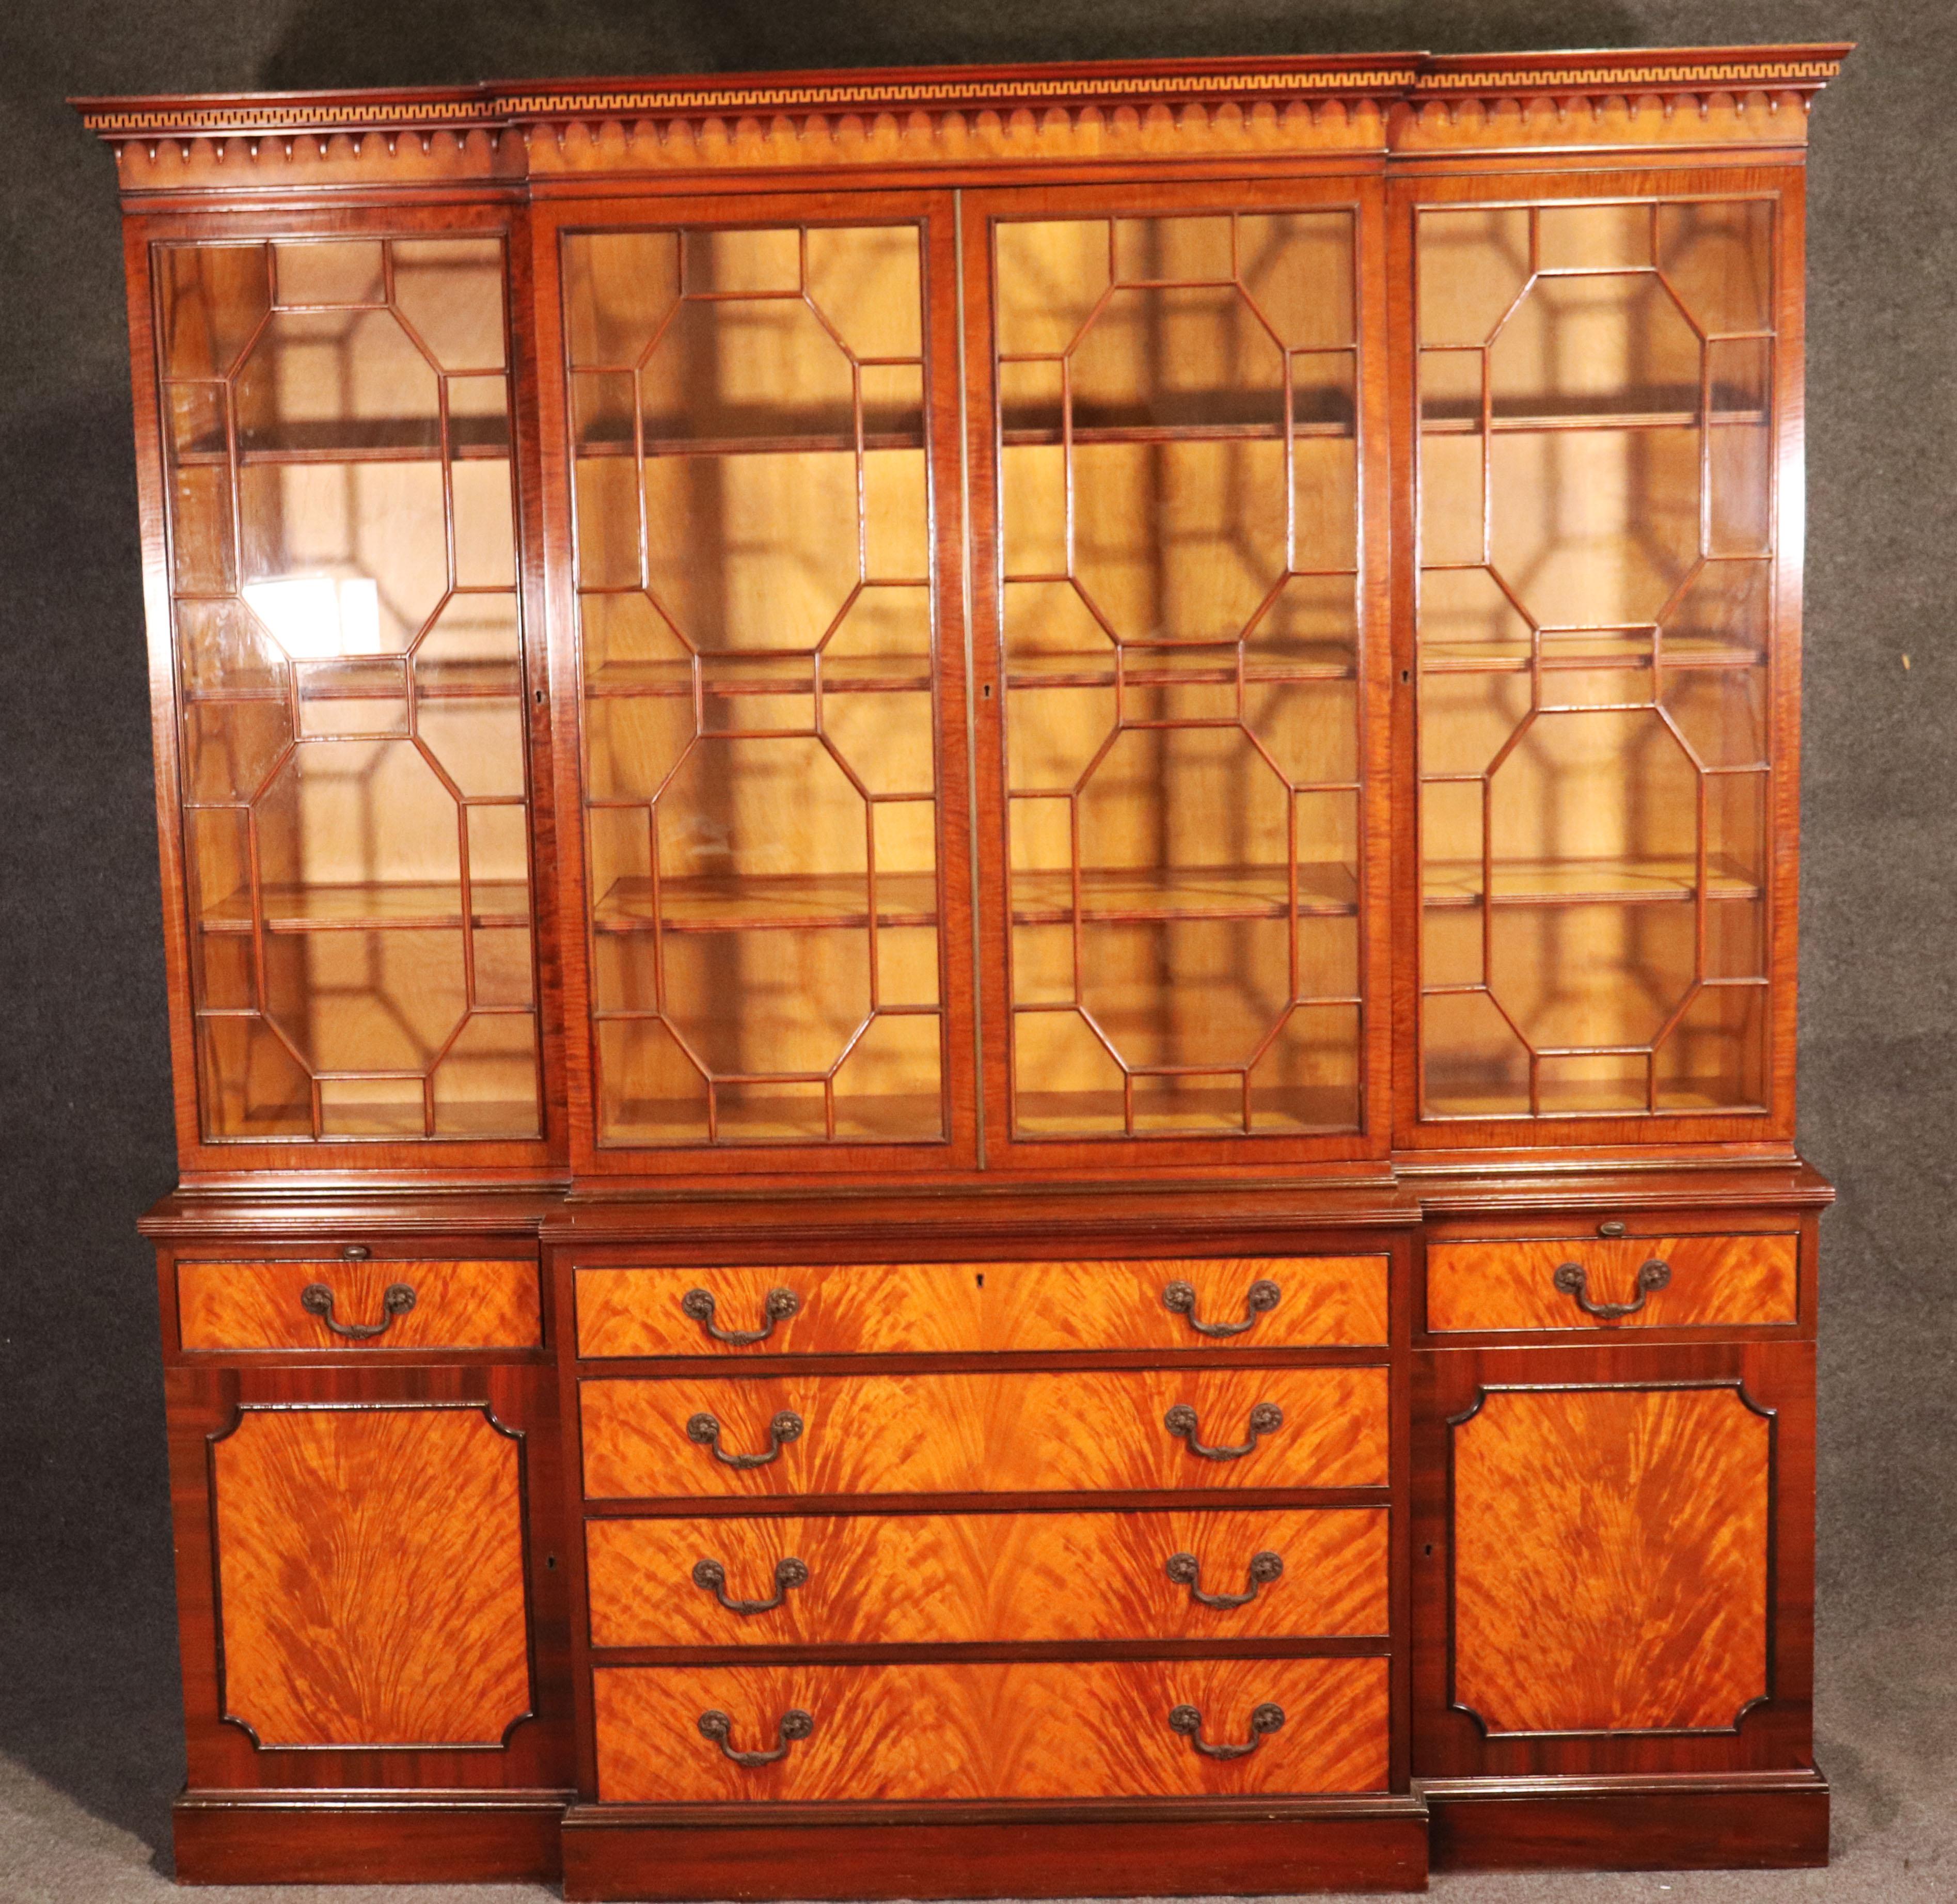 This is a fine quality breakfront bookcase from one of America's finest manufacturers in our nation's history. This incredibly well made, crotch grain walnut and solid mahogany breakfront features individual glazed mullions on the doors and